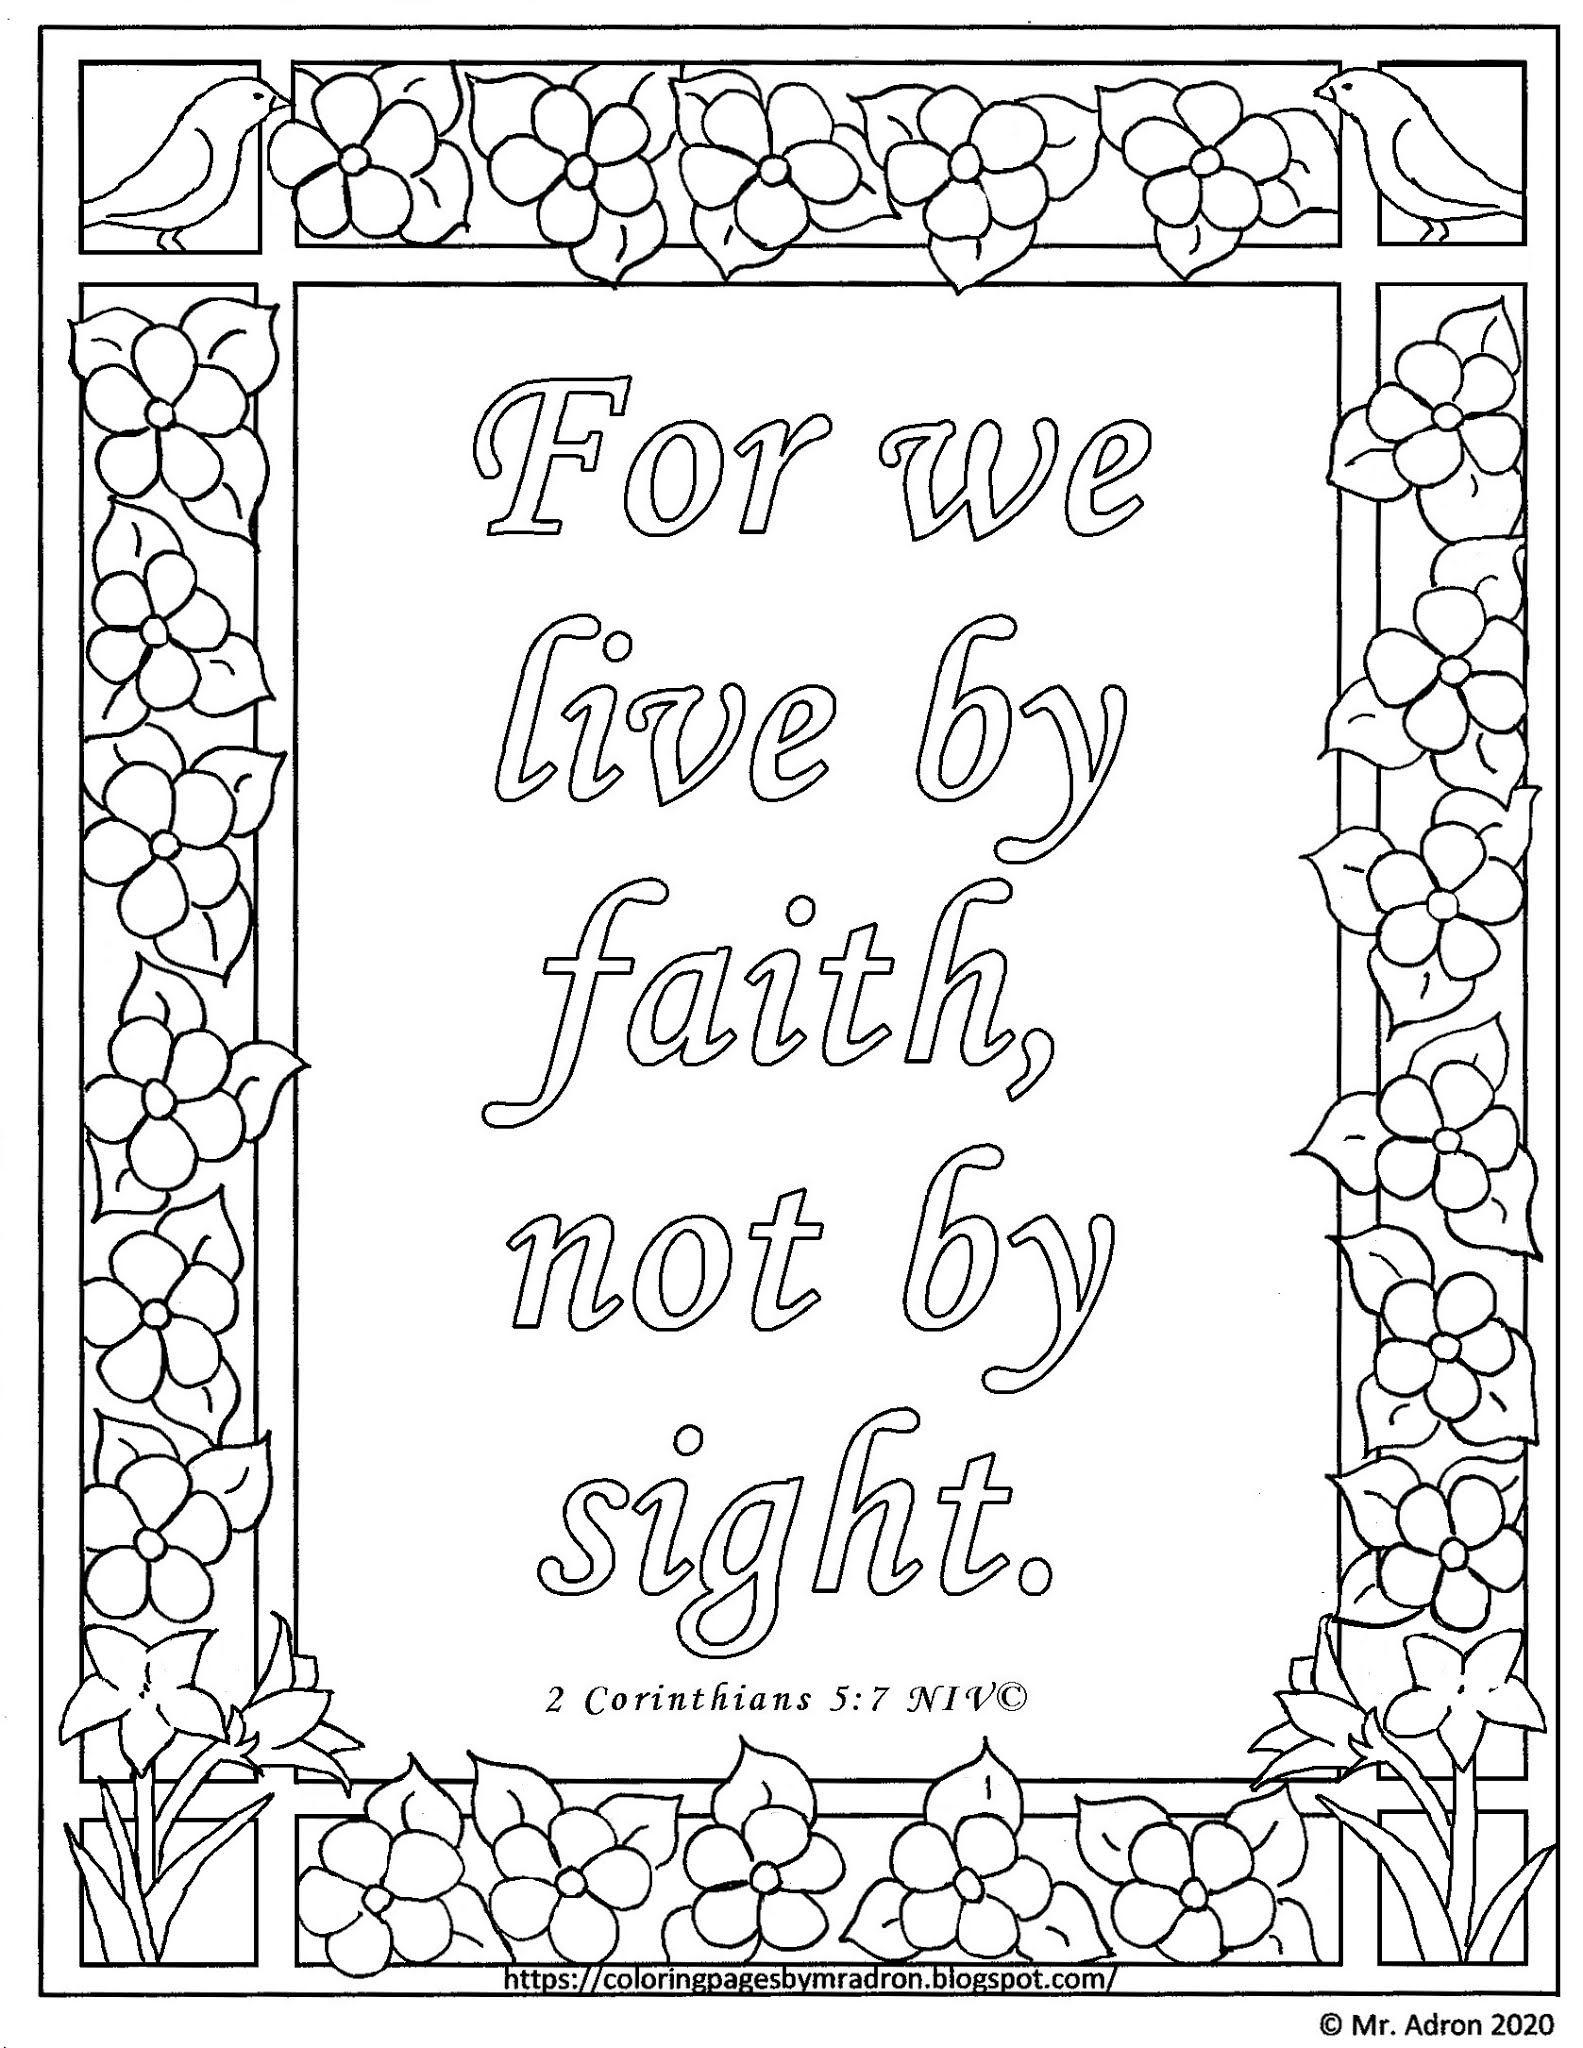 coloring-pages-for-kids-by-mr-adron-free-2-corinthians-5-7-print-and